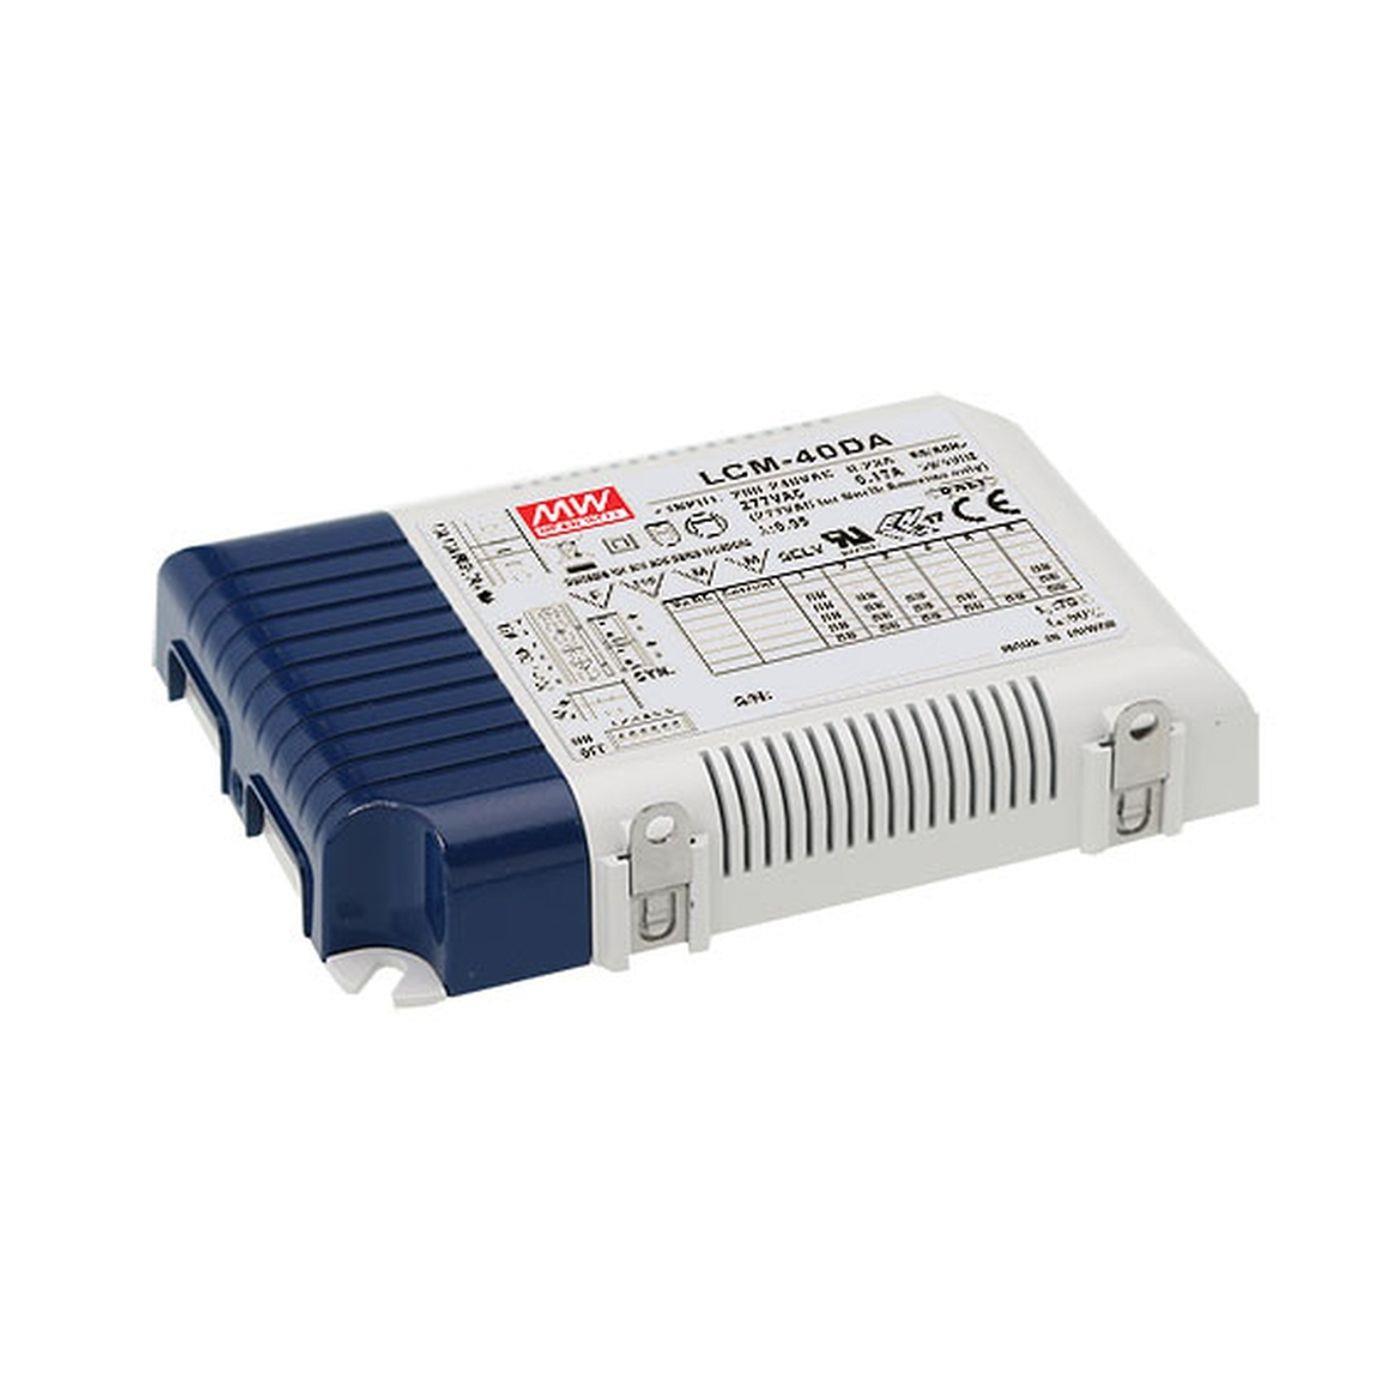 LCM-40DA 42W Dali Dimmable Constant current LED power supply Driver Transformer 350 500 600 700 900 1050 1400mA